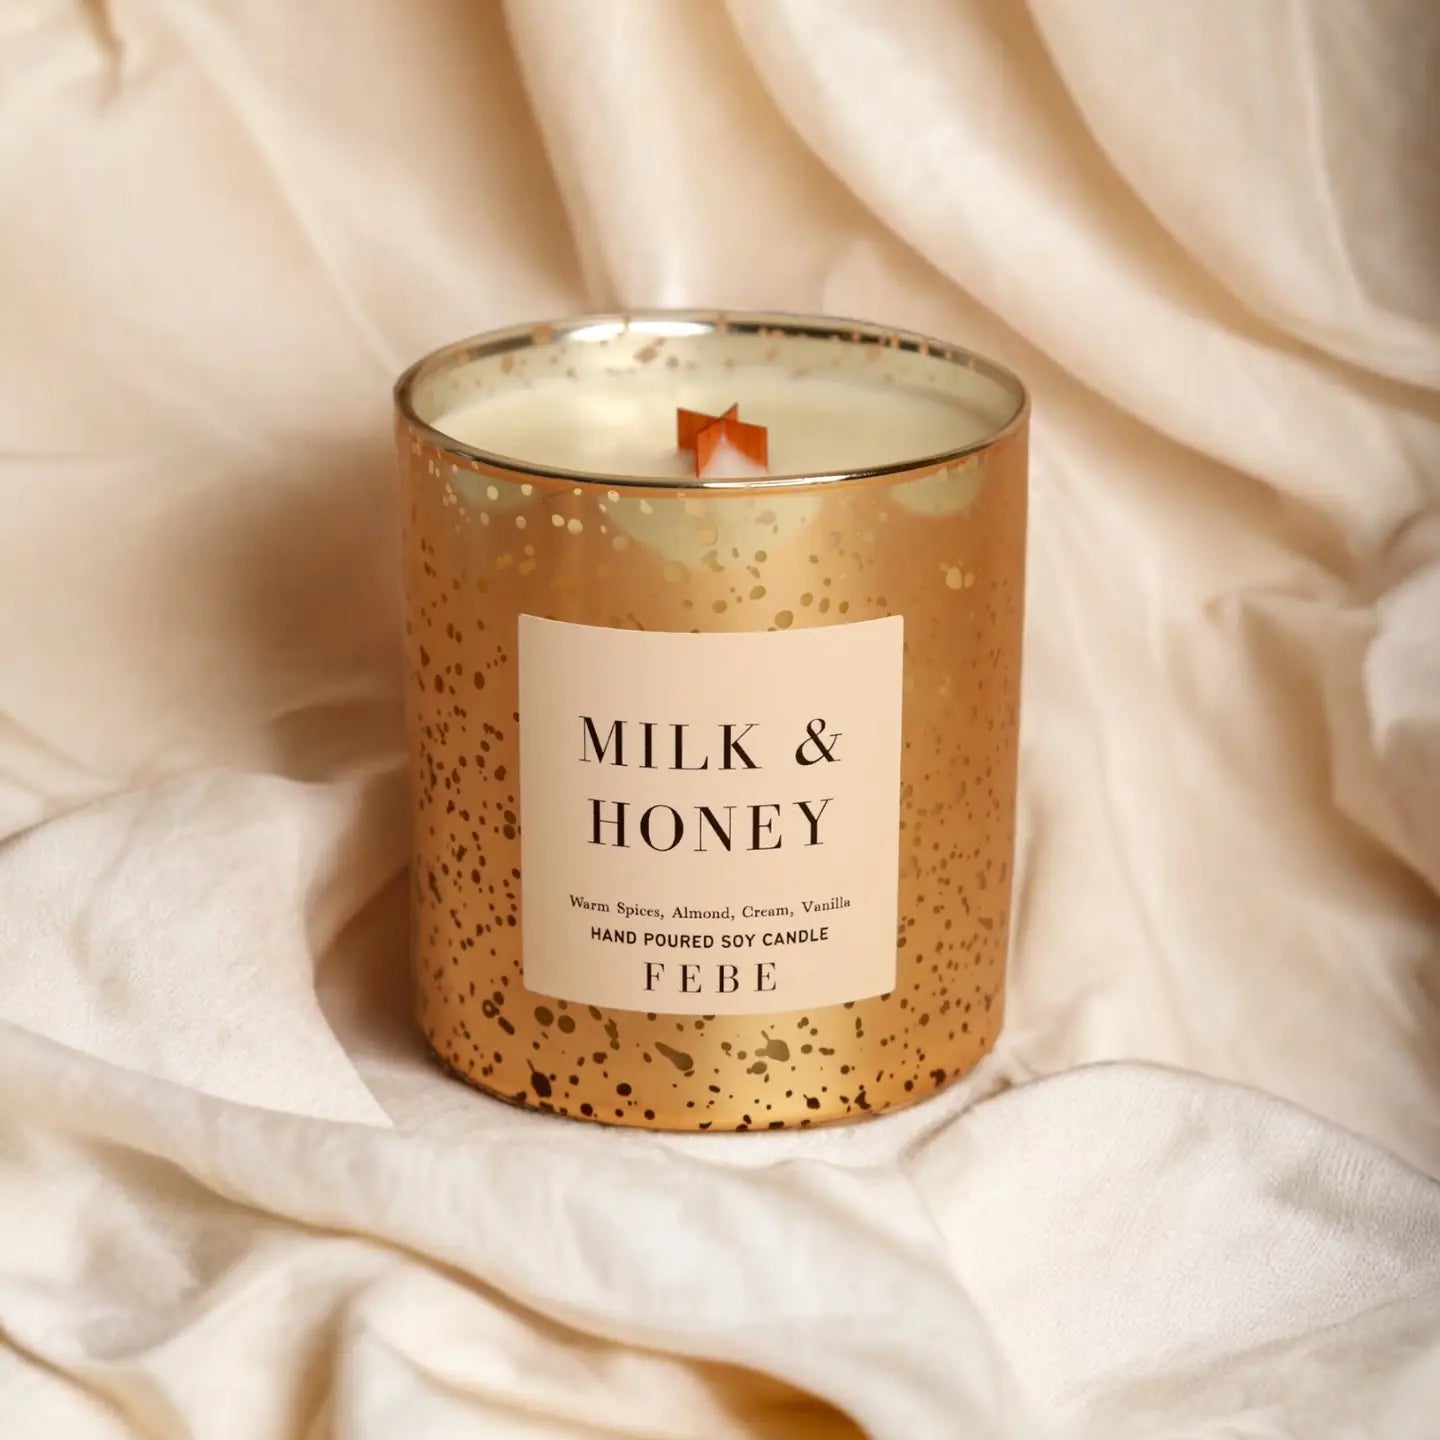 A FEBE candle labeled "Milk & Honey" in a speckled gold container, resting on a soft, wrinkled cream fabric background in Arizona style.